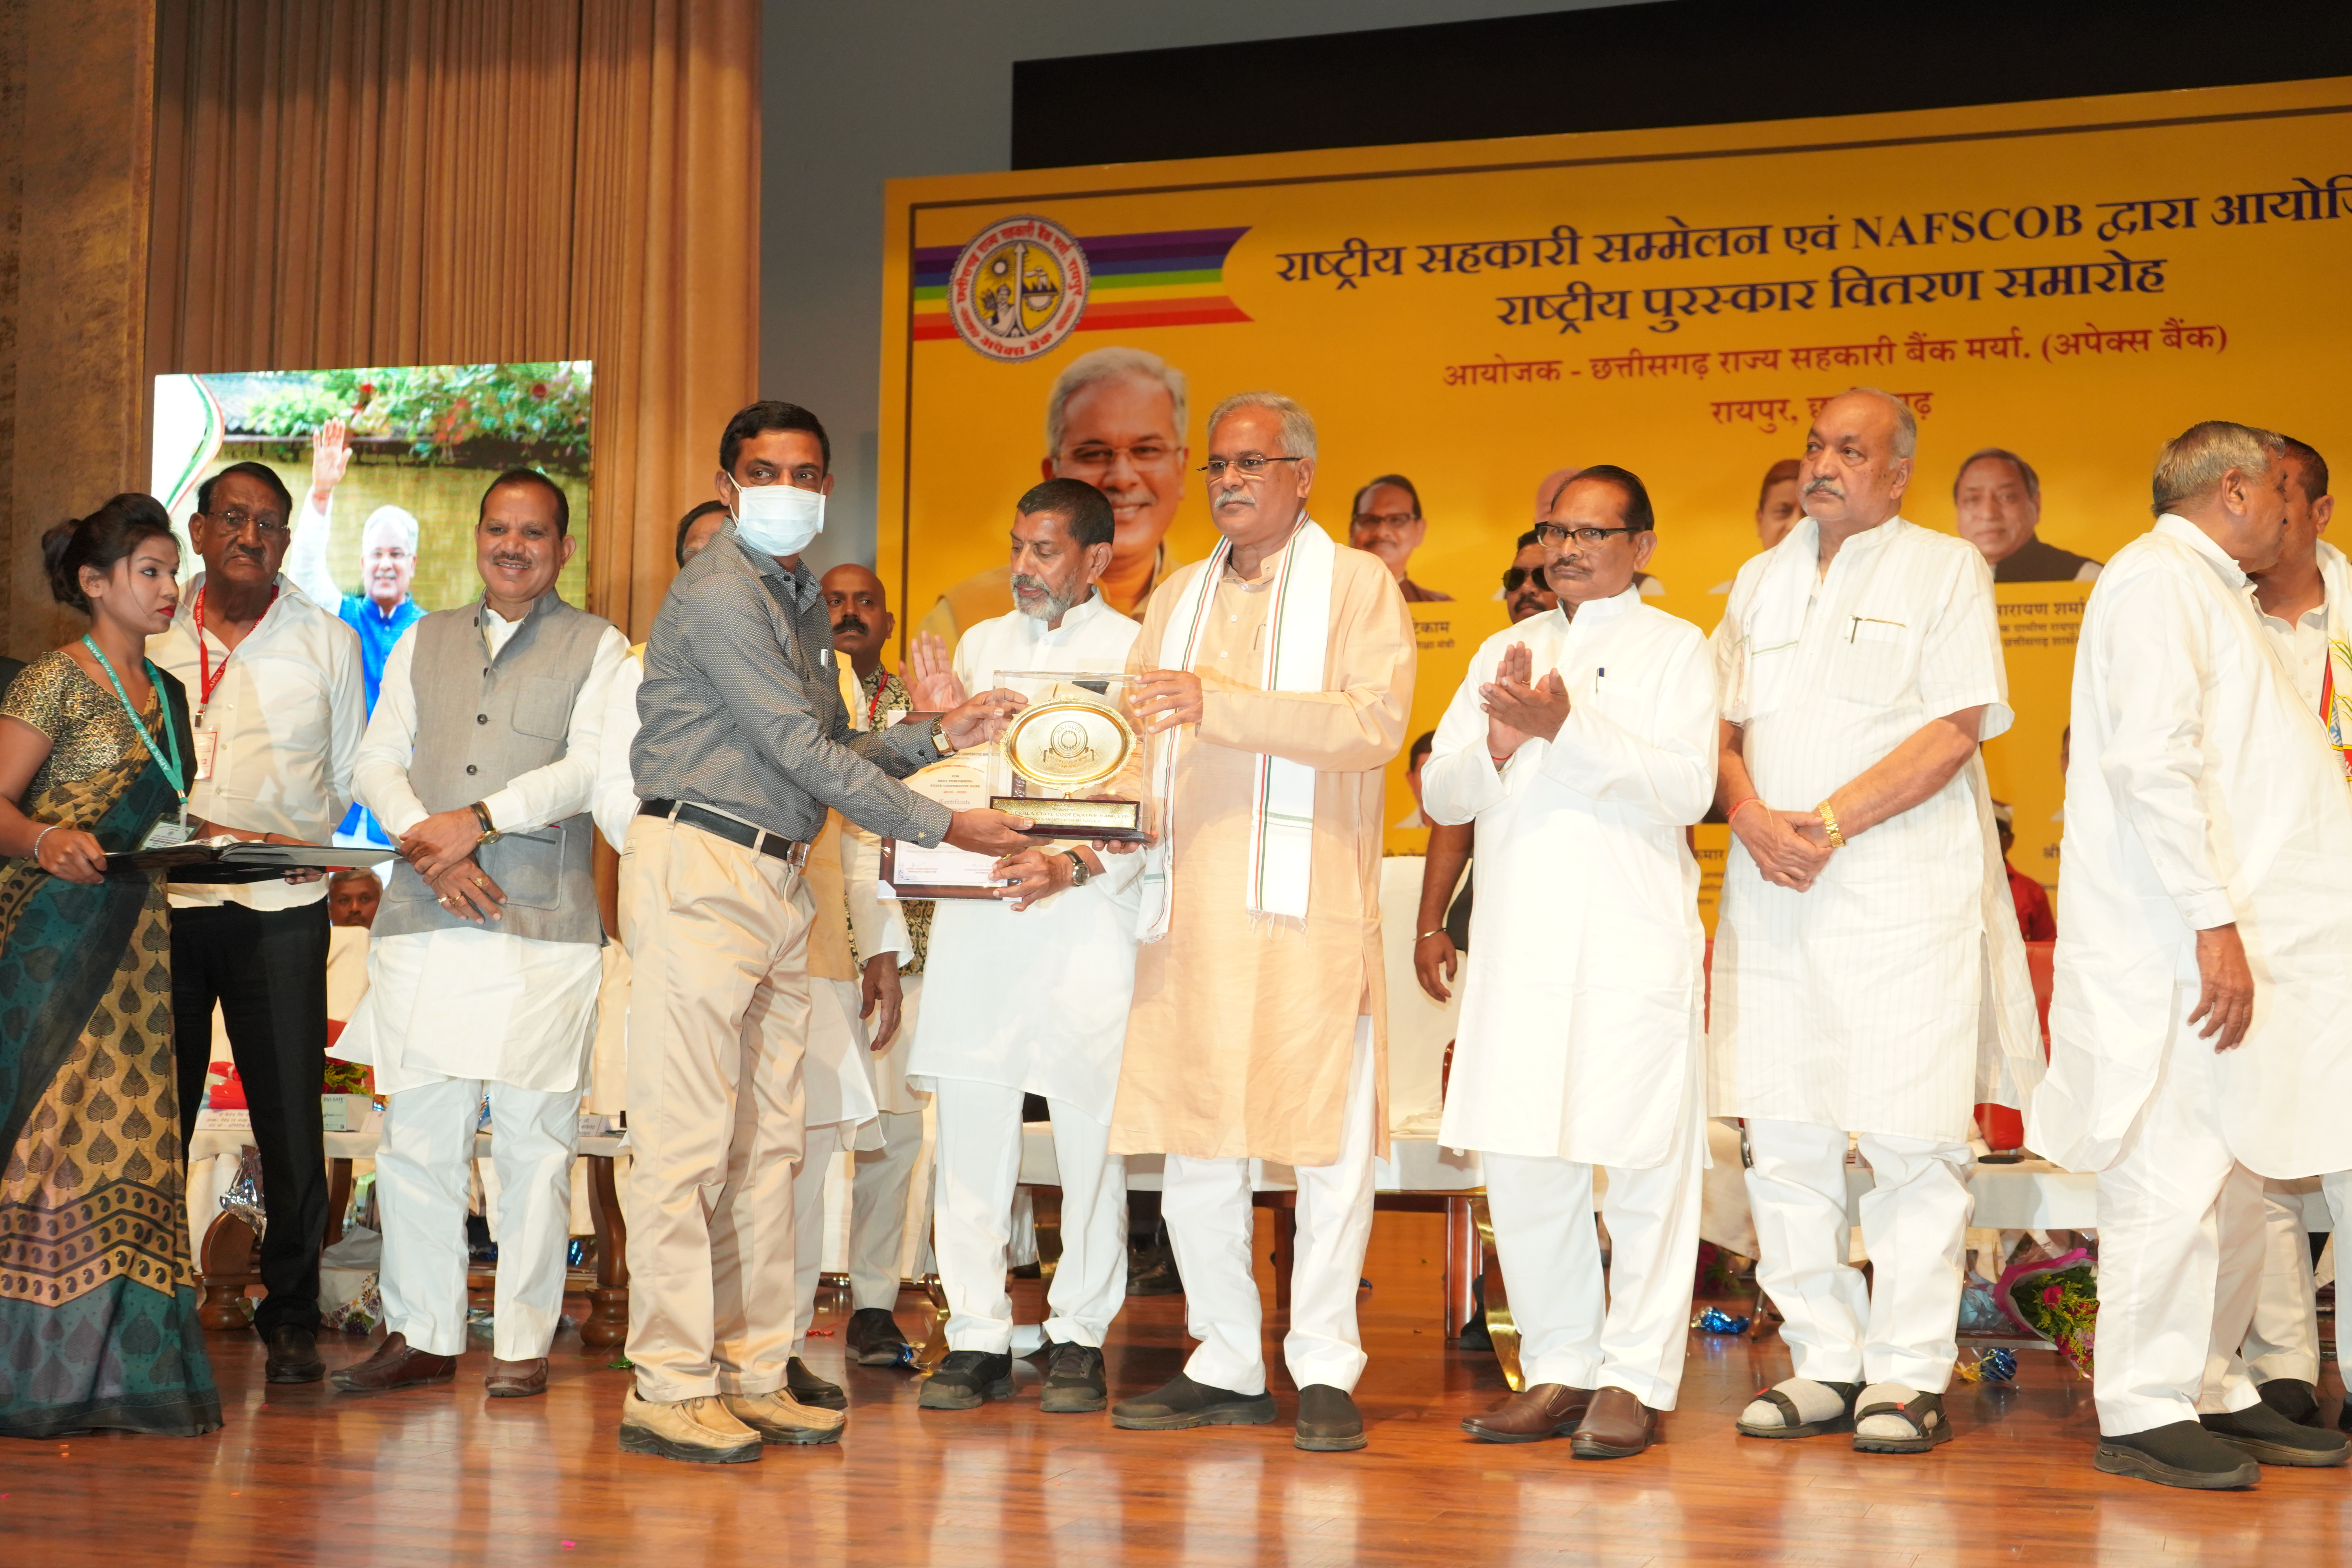 The NAFSCOB Award for the best State Co-operative bank